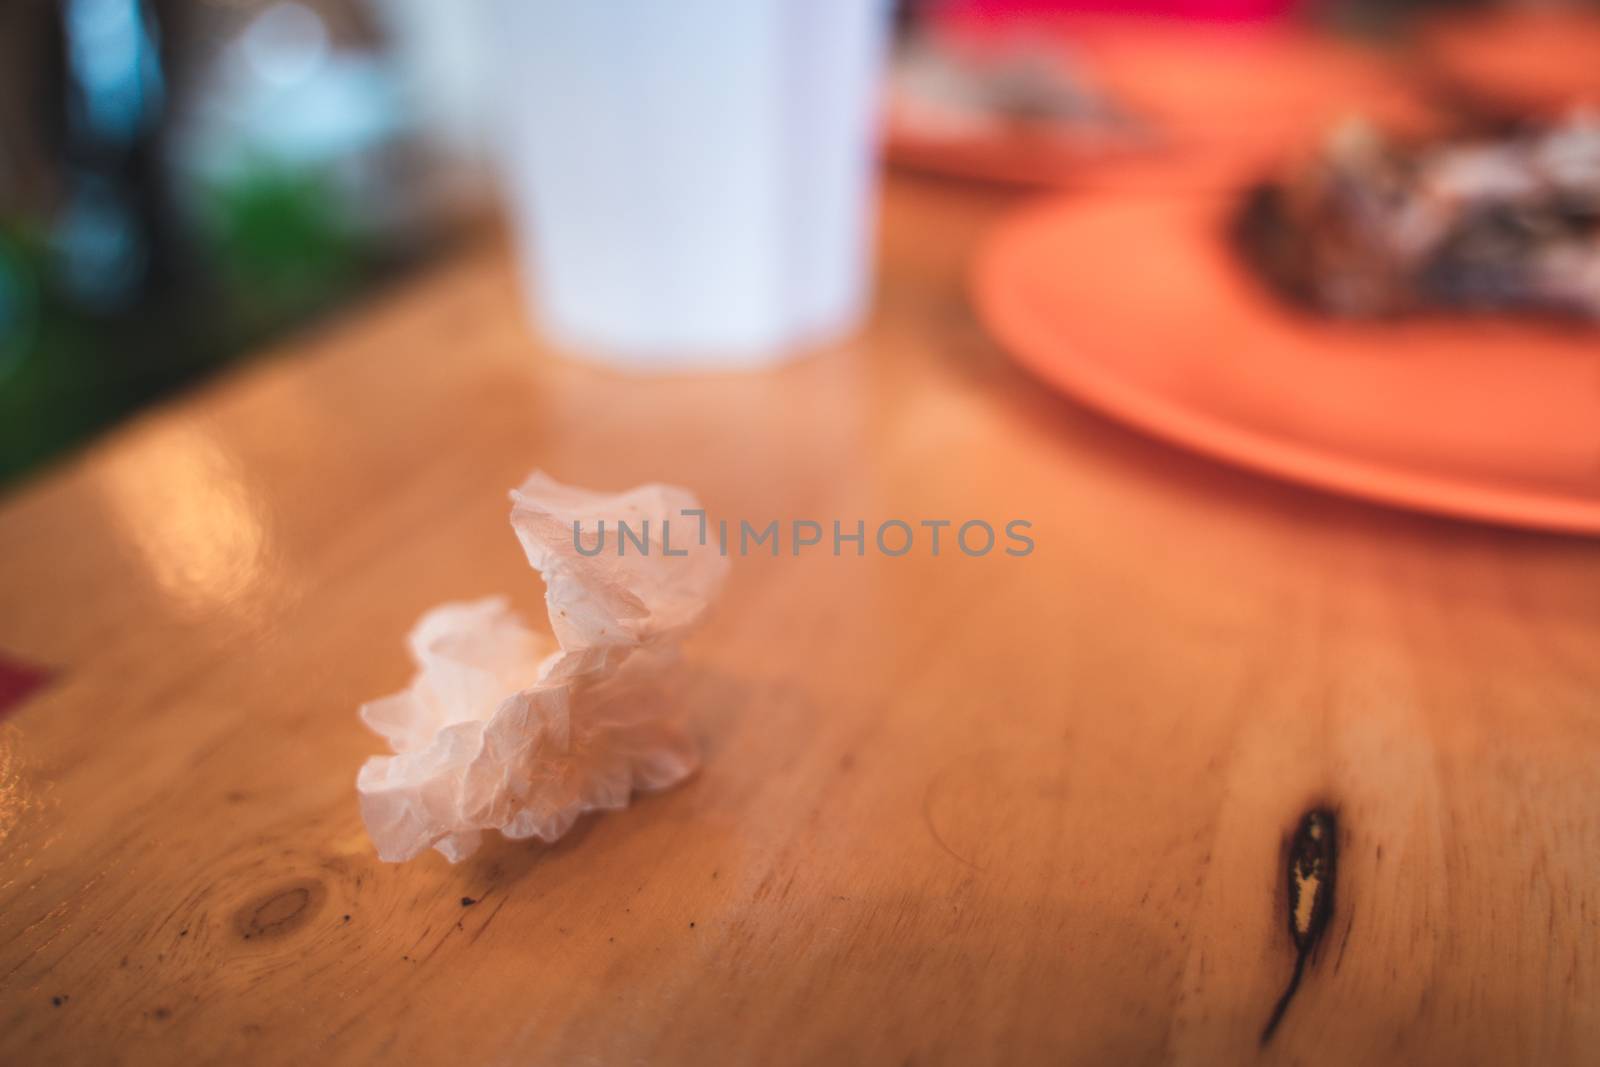 The Used Tissue on the food table with blur background